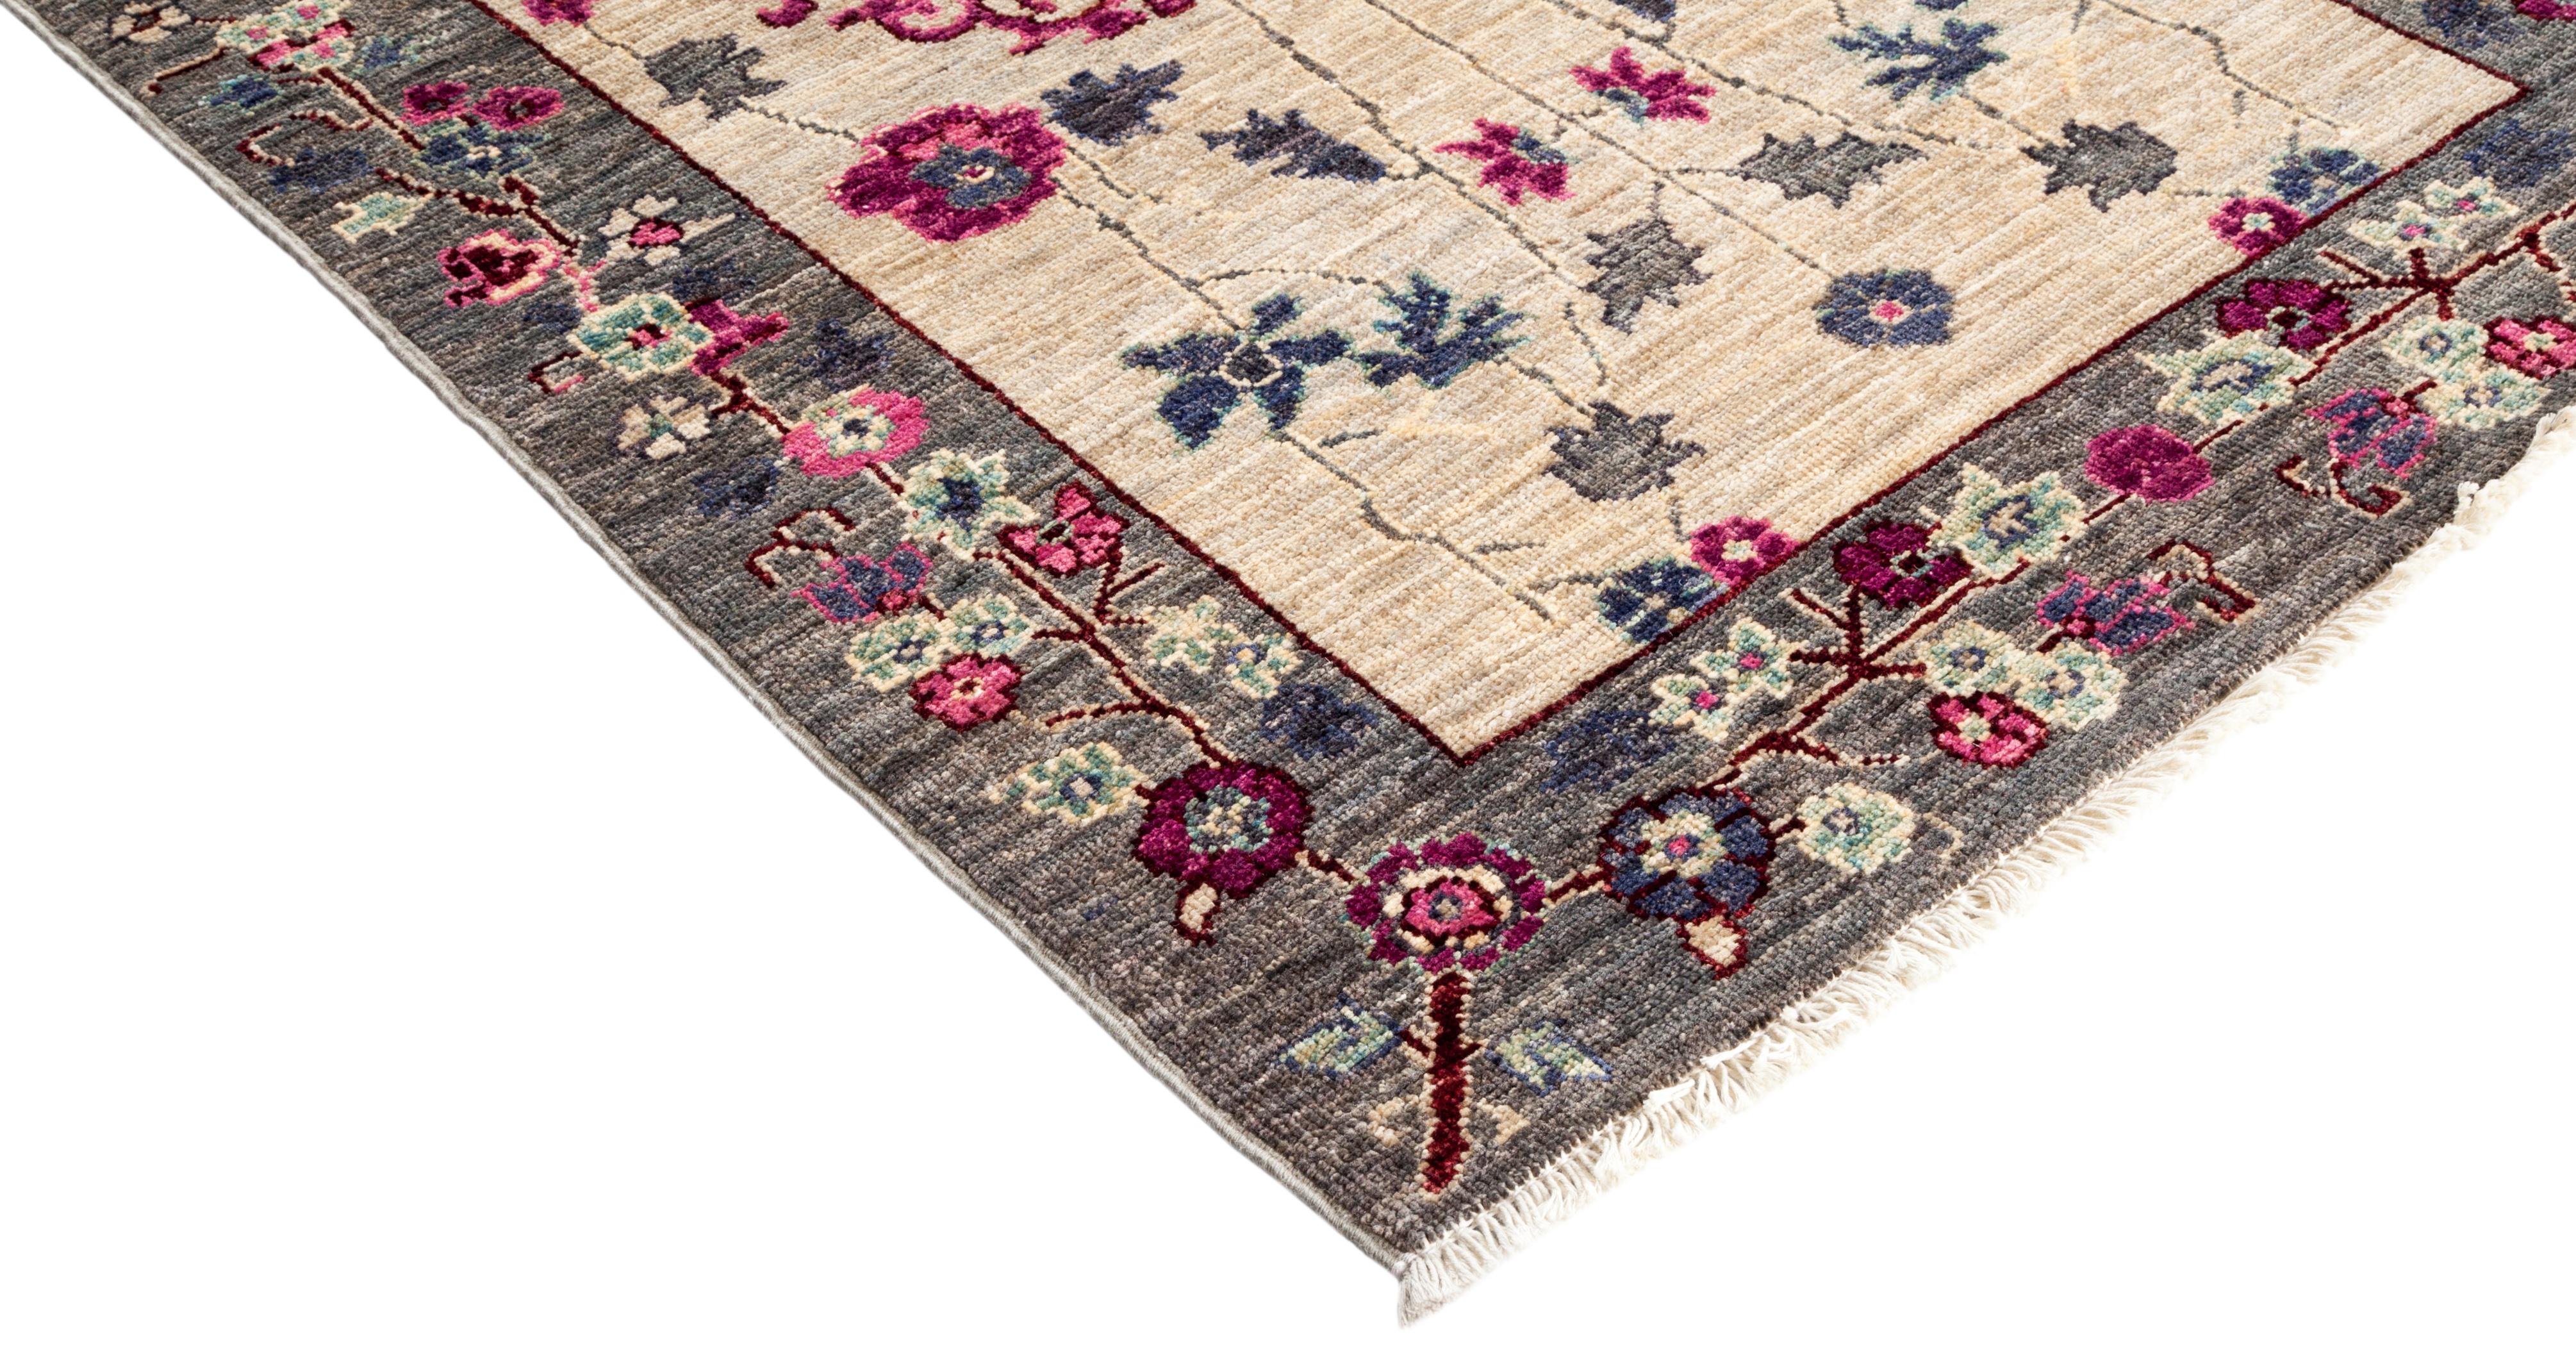 Color: Ivory, made in Pakistan. 100% wool. Whether boasting a field of flowers or ancient tribal symbols, patterned rugs are the easiest way to enrich a space. Subtle colors and intricate motifs reinforce the quiet sophistication of a traditional